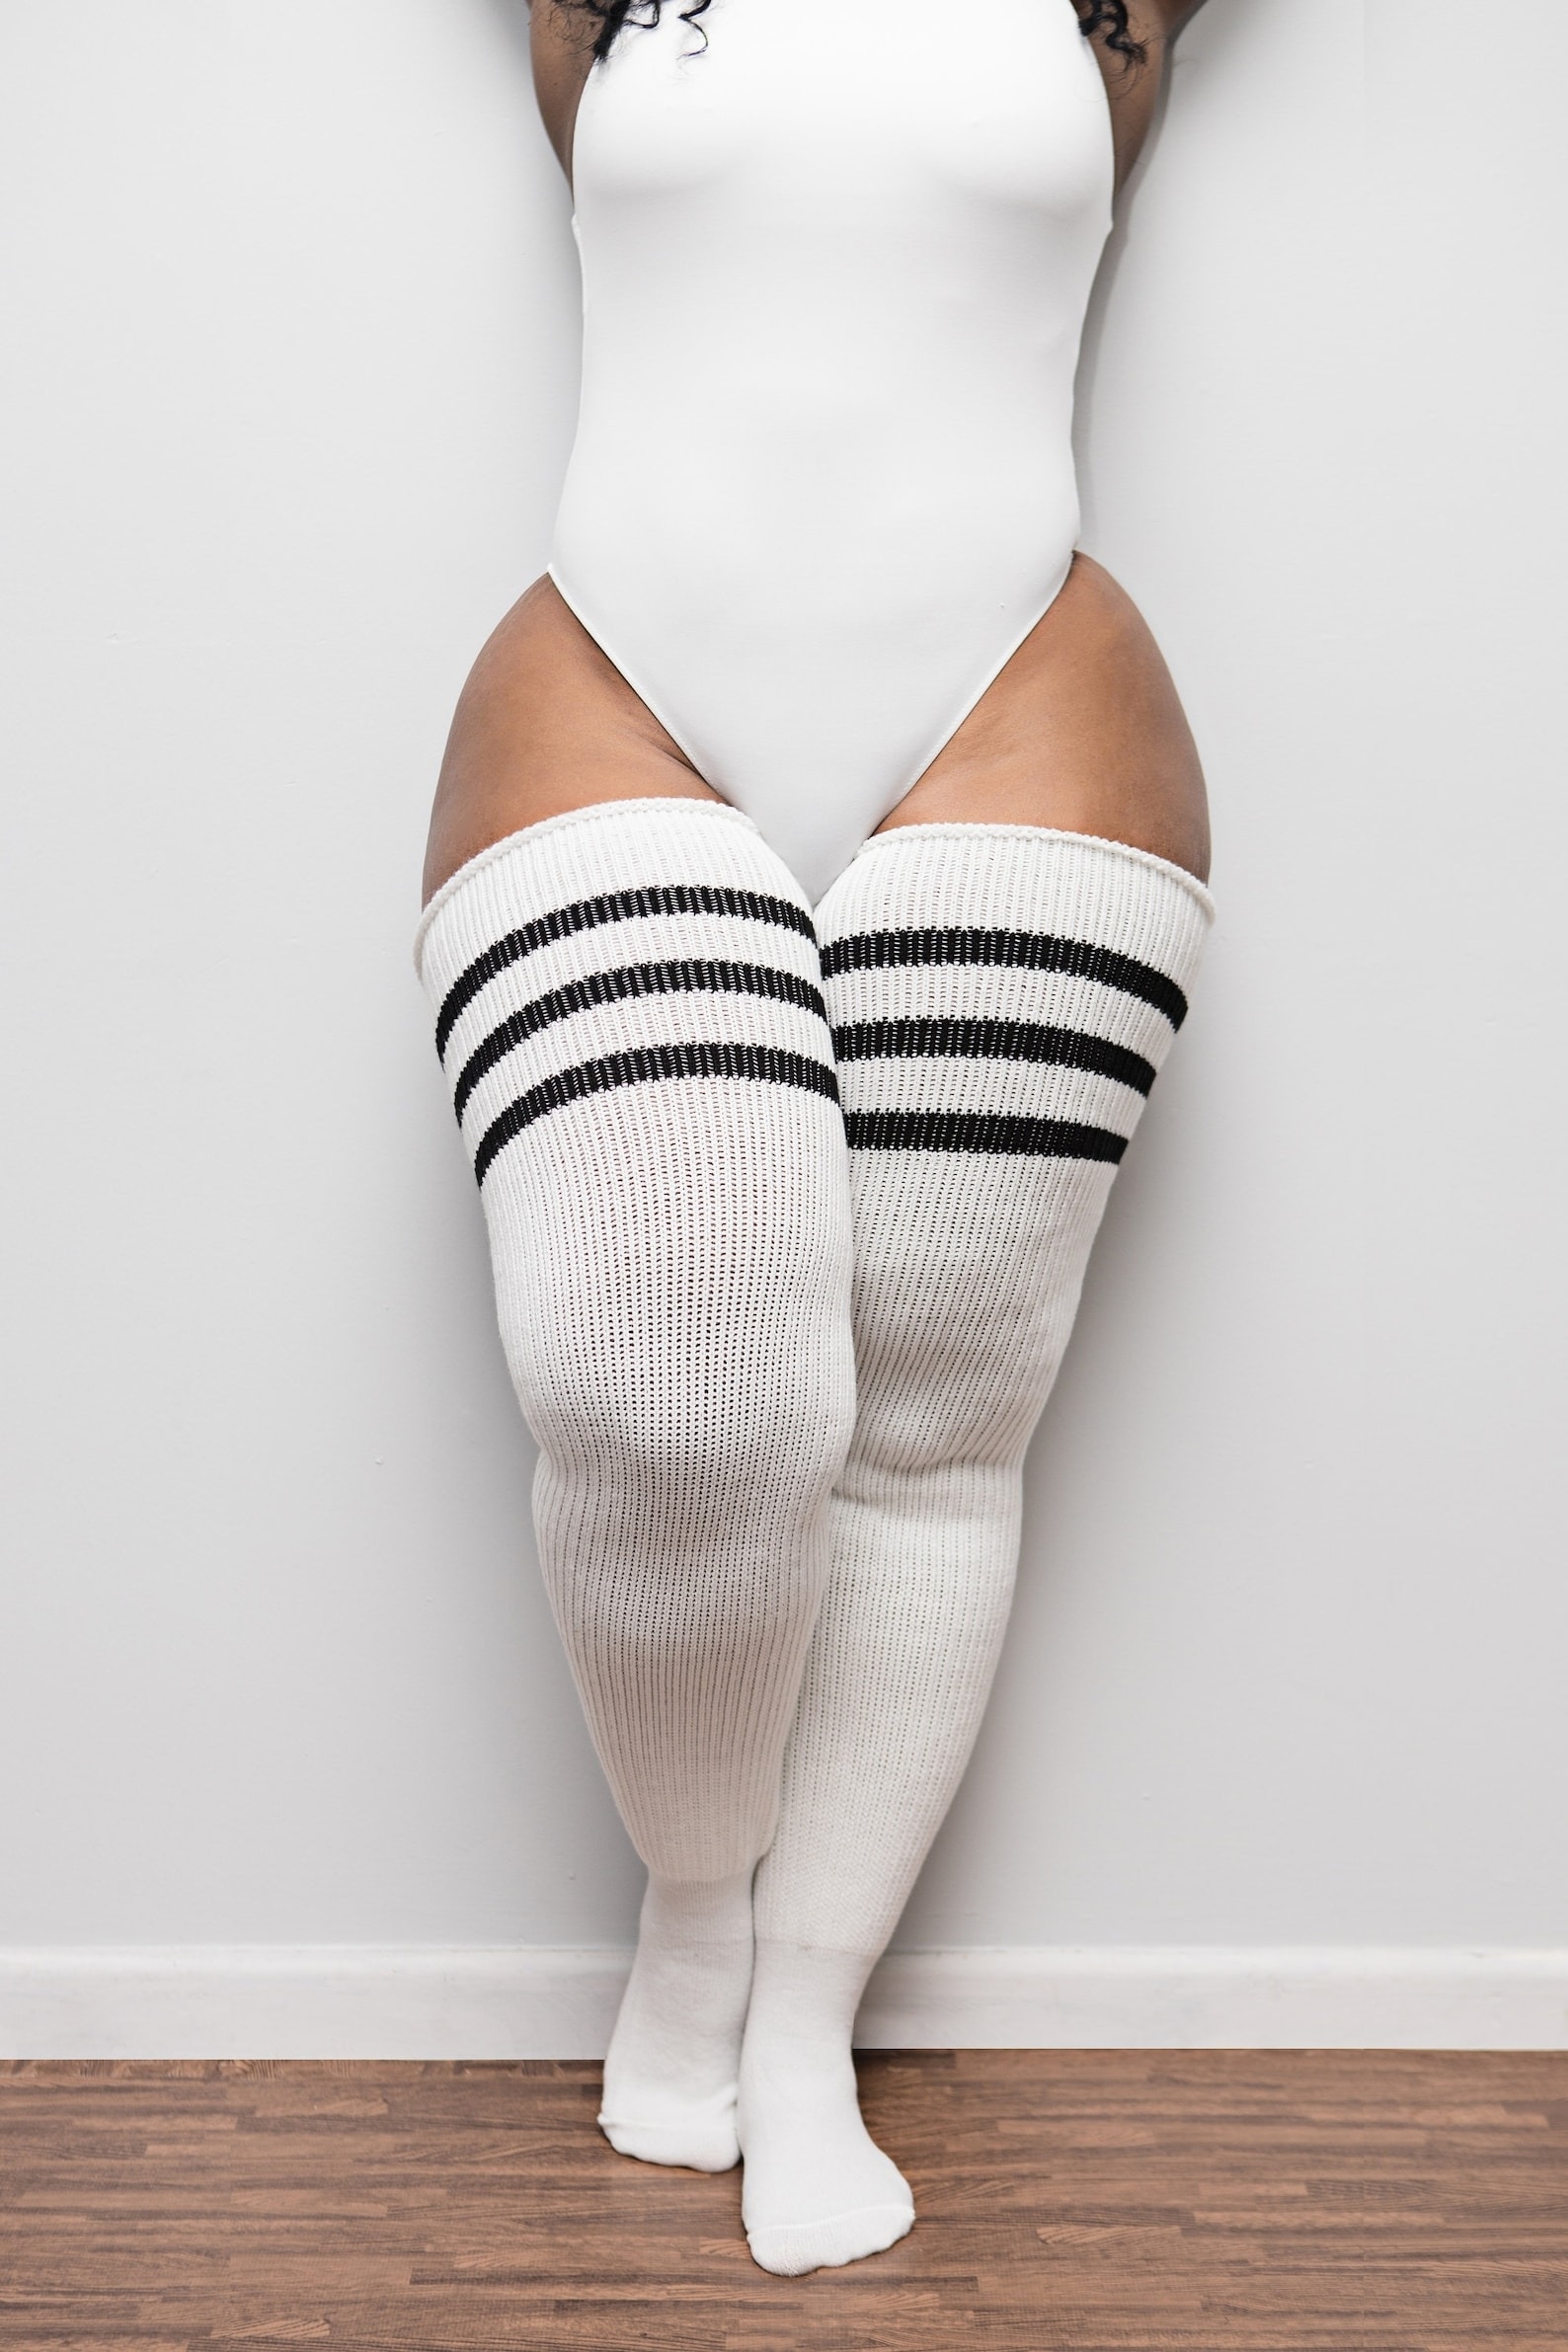 19 Best Thigh-High Socks & Tights You'll Love Wearing